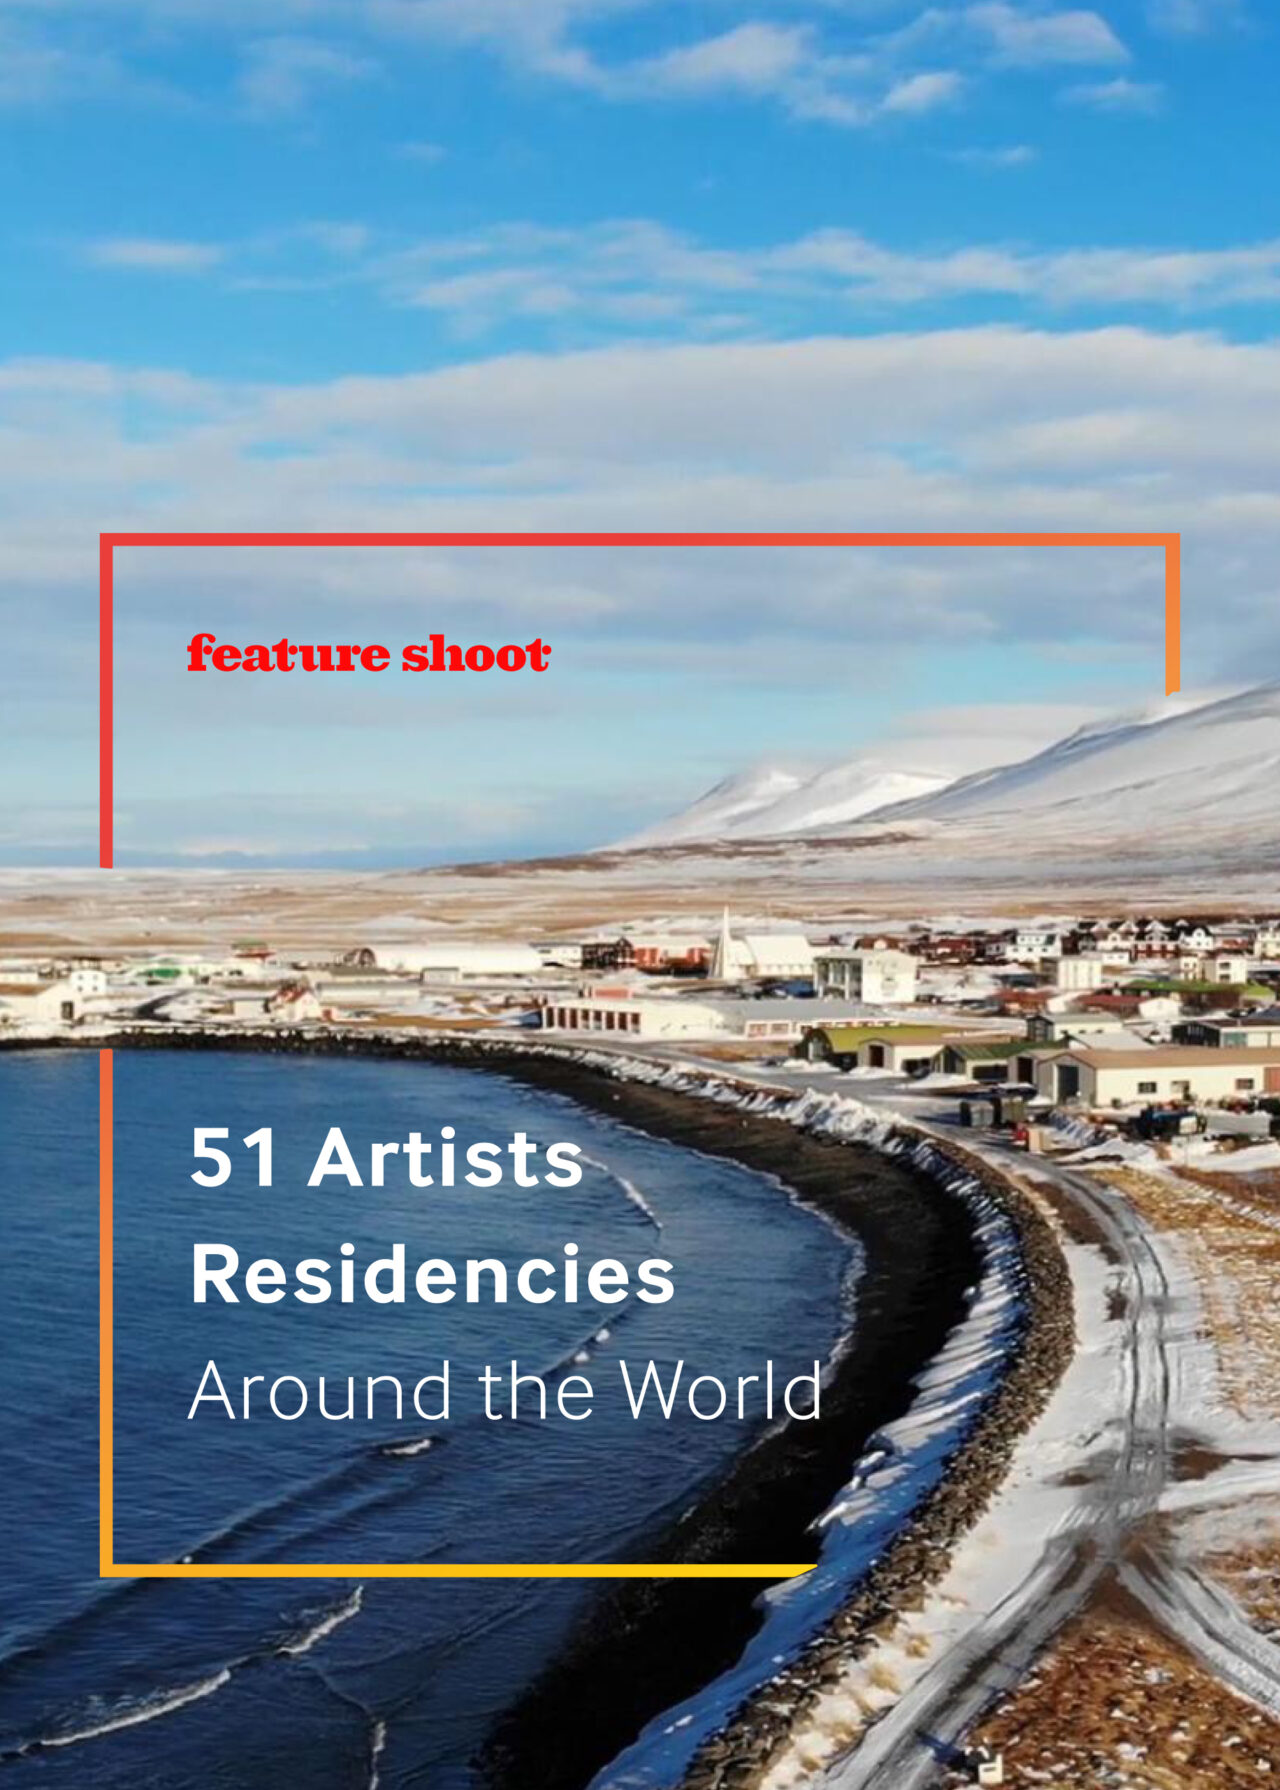 51 Artist Residencies Around the World A new guide from Feature Shoot